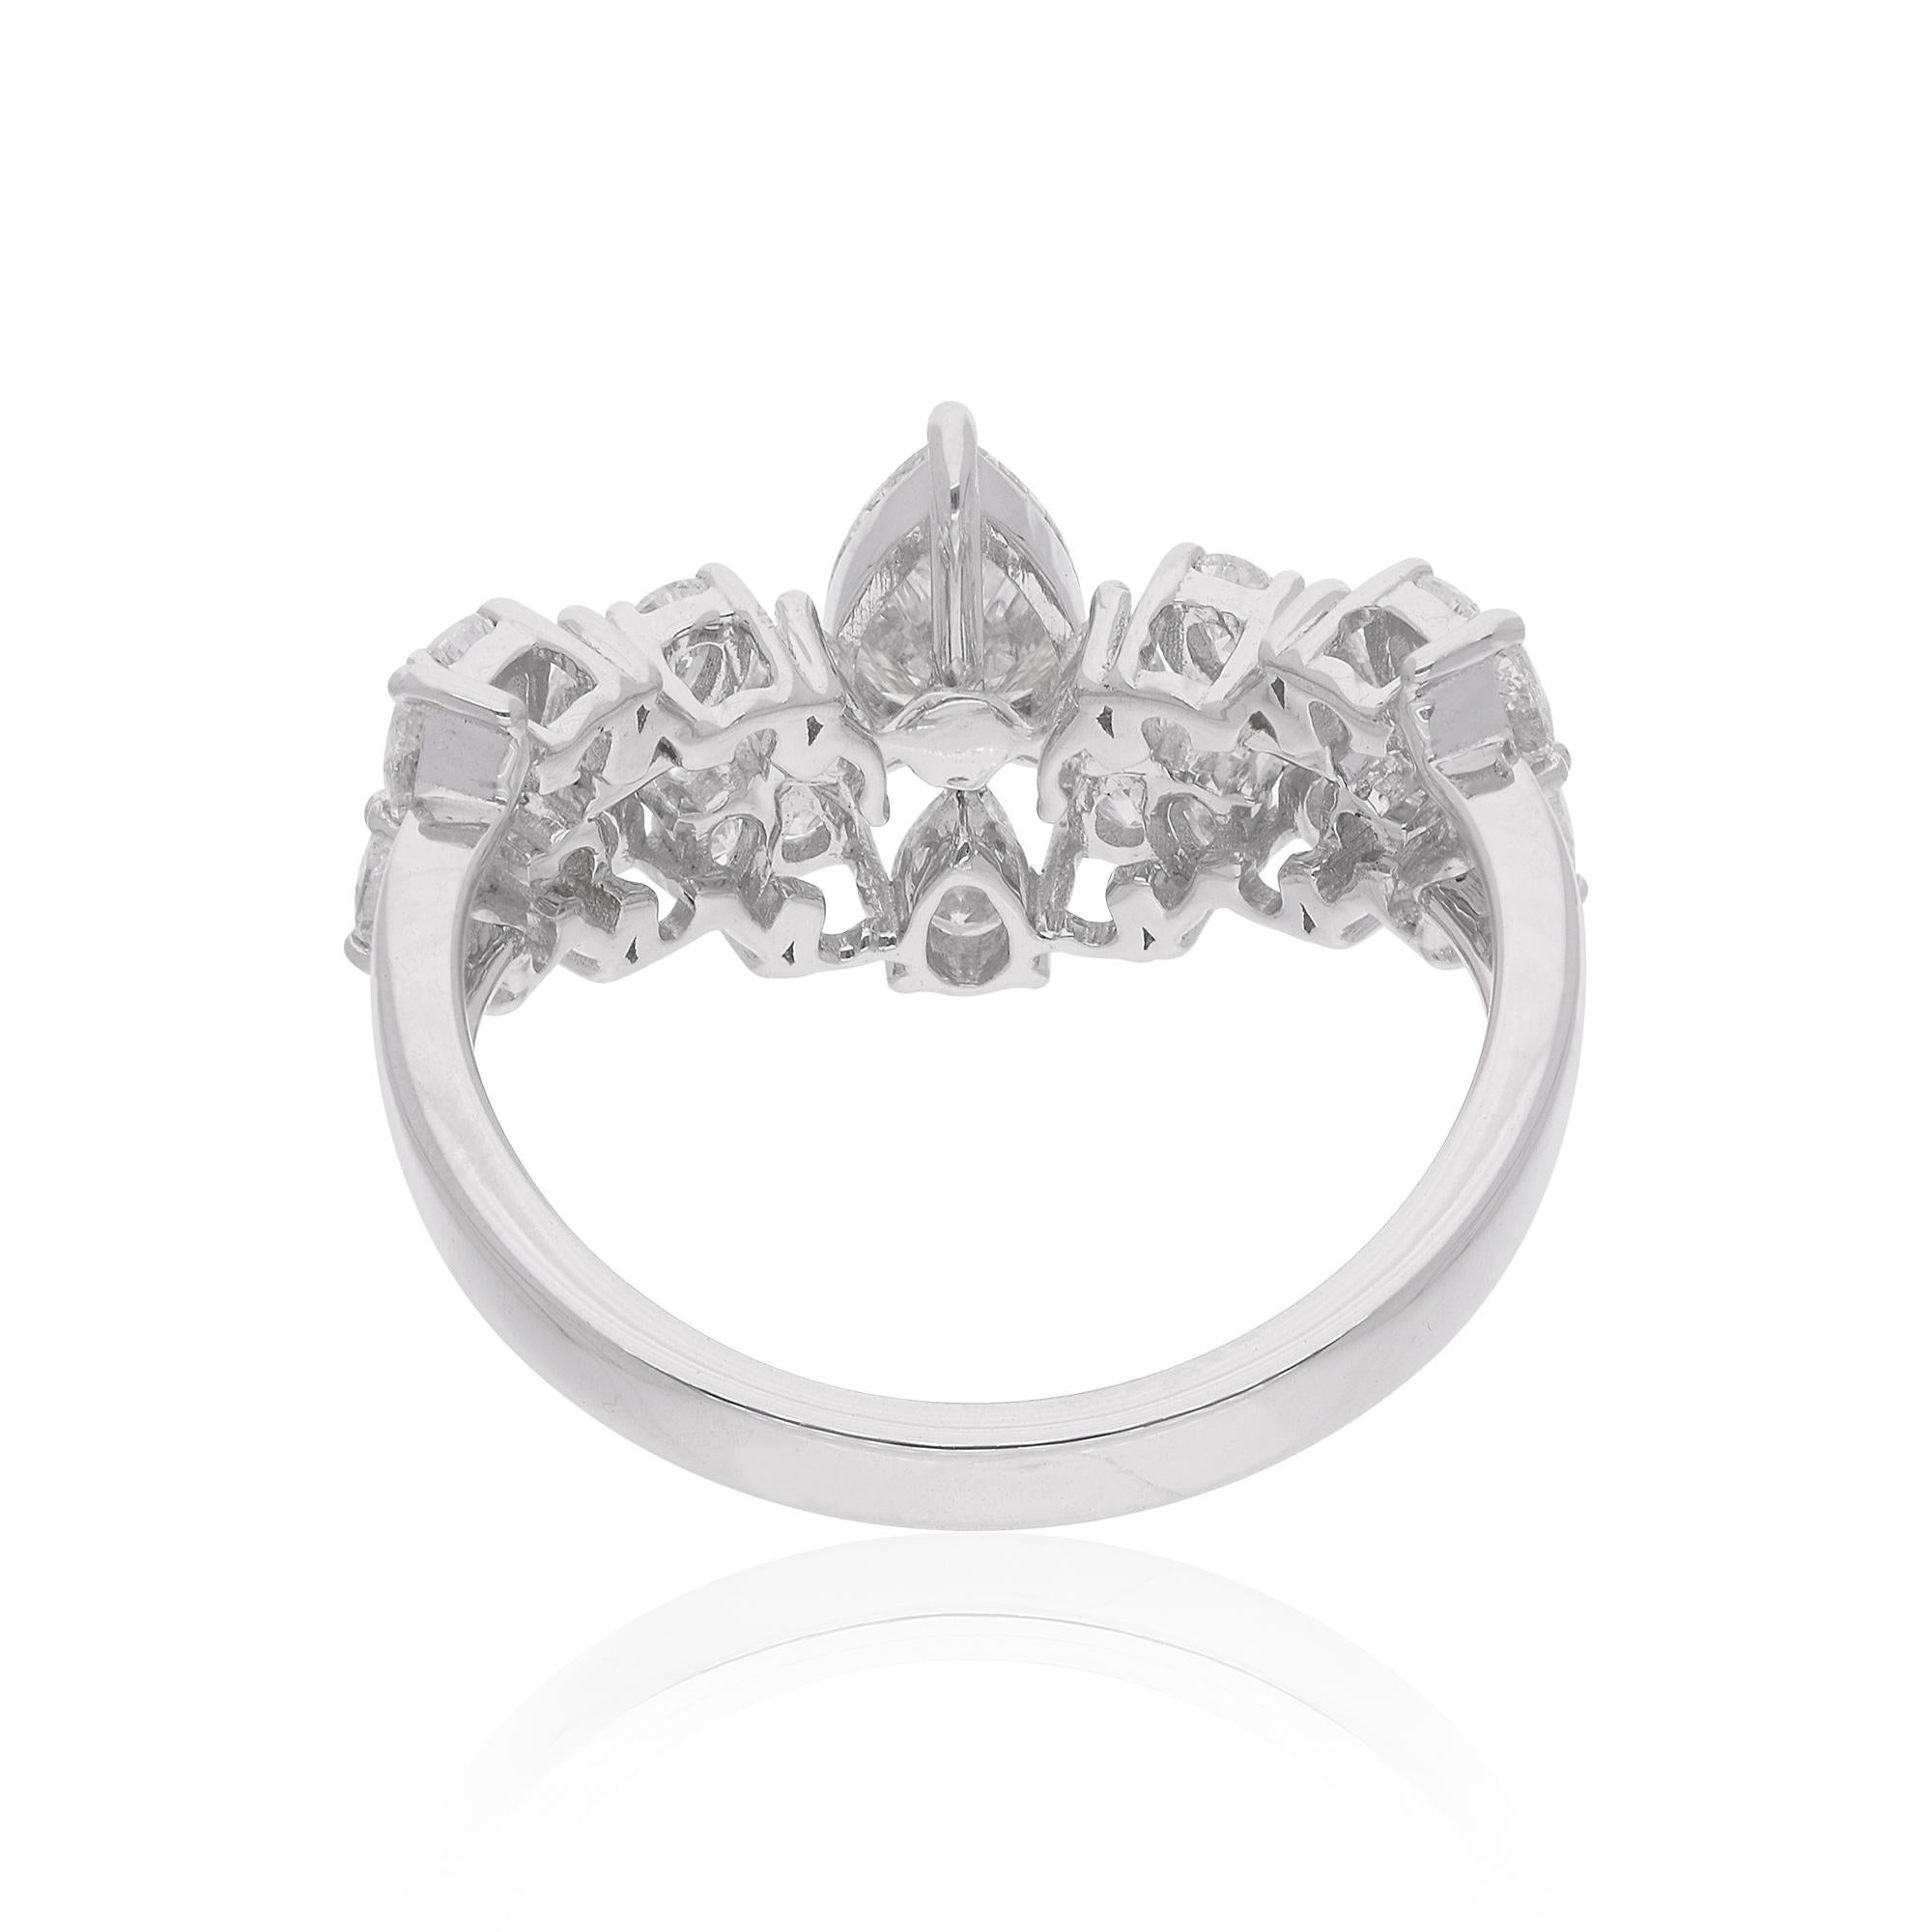 Embrace the allure of timeless elegance with this breathtaking 1.61 Ct. Pear Diamond Chevron Design Ring, meticulously crafted in 14 Karat White Gold. Handmade with precision and passion, this exquisite piece of jewelry is a true testament to